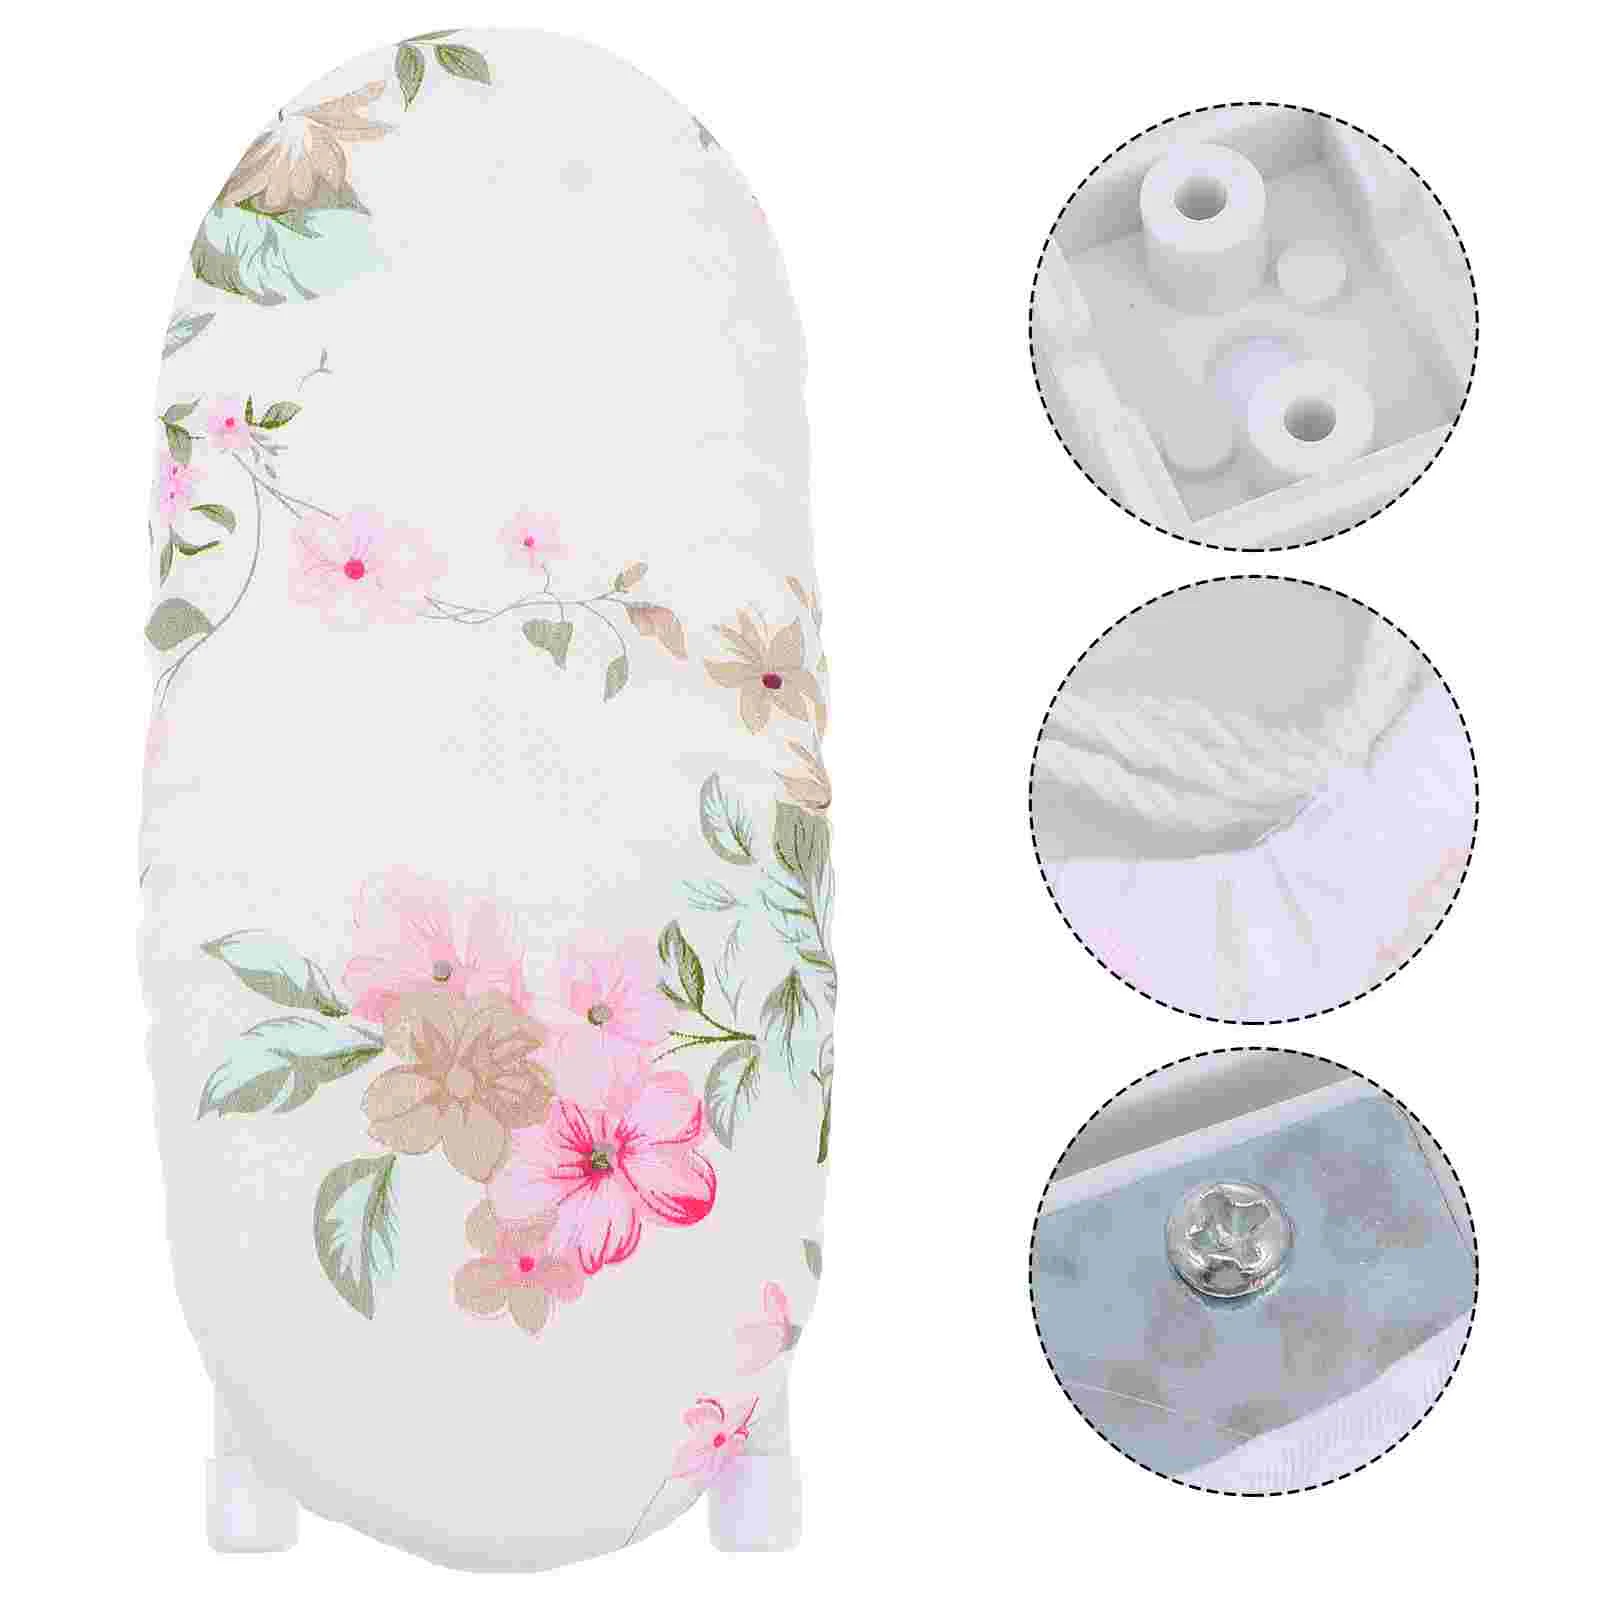 

Ironing Board Mini Folding Small Tabletop Table Portable Clothes Stand Iron Cover Foldable Padpressing Space Countertop Desk